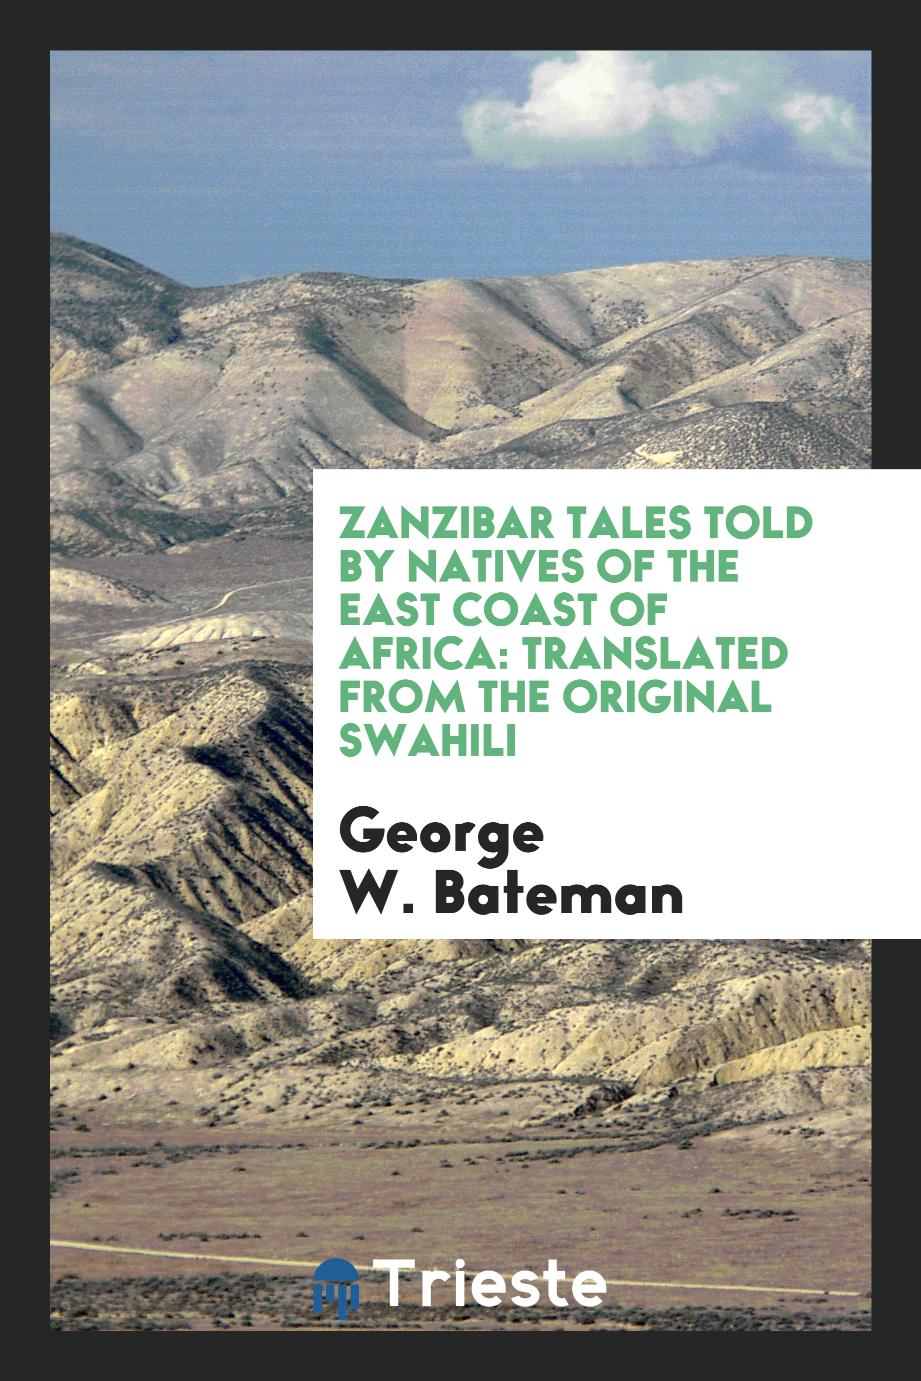 Zanzibar tales told by natives of the east coast of Africa: translated from the original Swahili